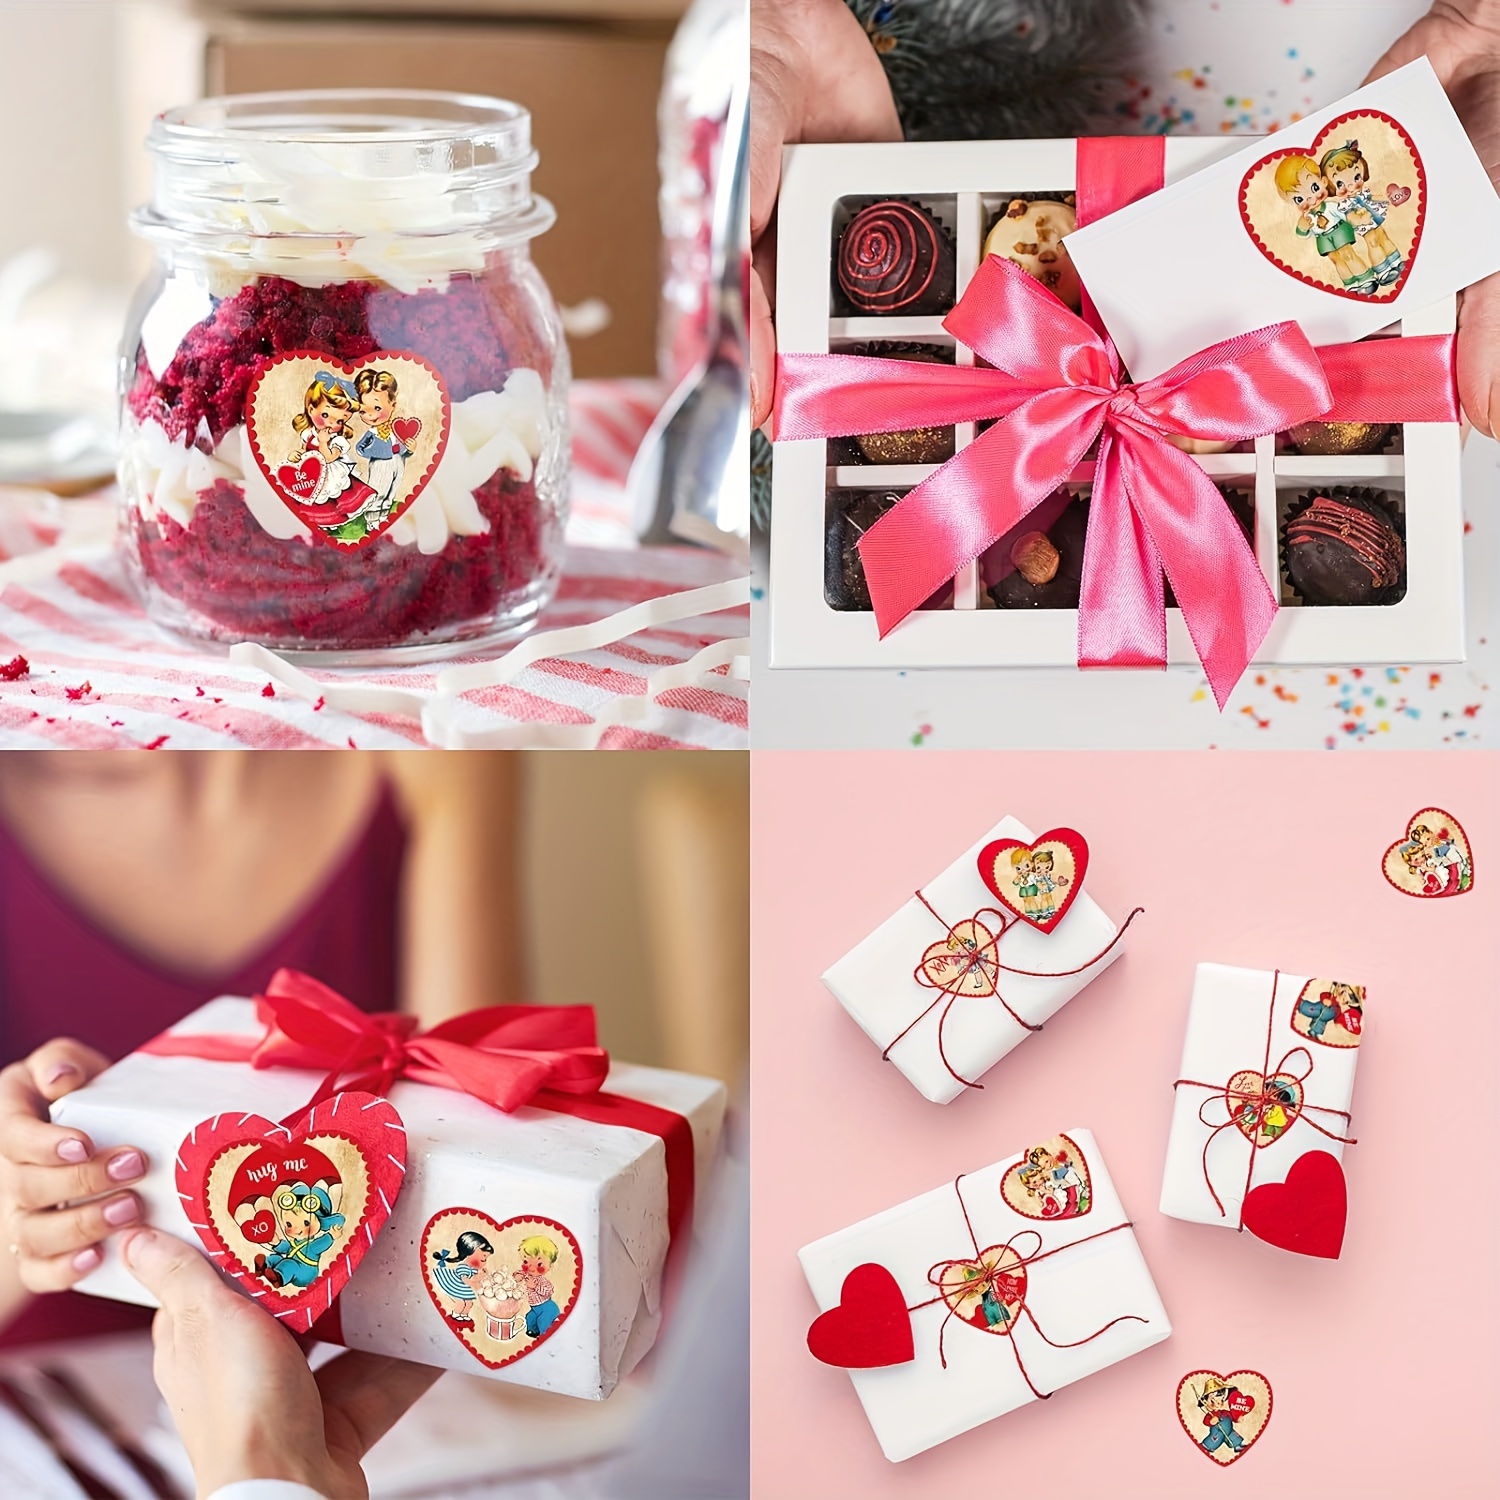 500 PCS Stickers For Kids, Valentines Day Stickers Love Decorative Red  Heart Stickers Labels For Teachers Classrooms Accessories Cards Envelopes  Boxes